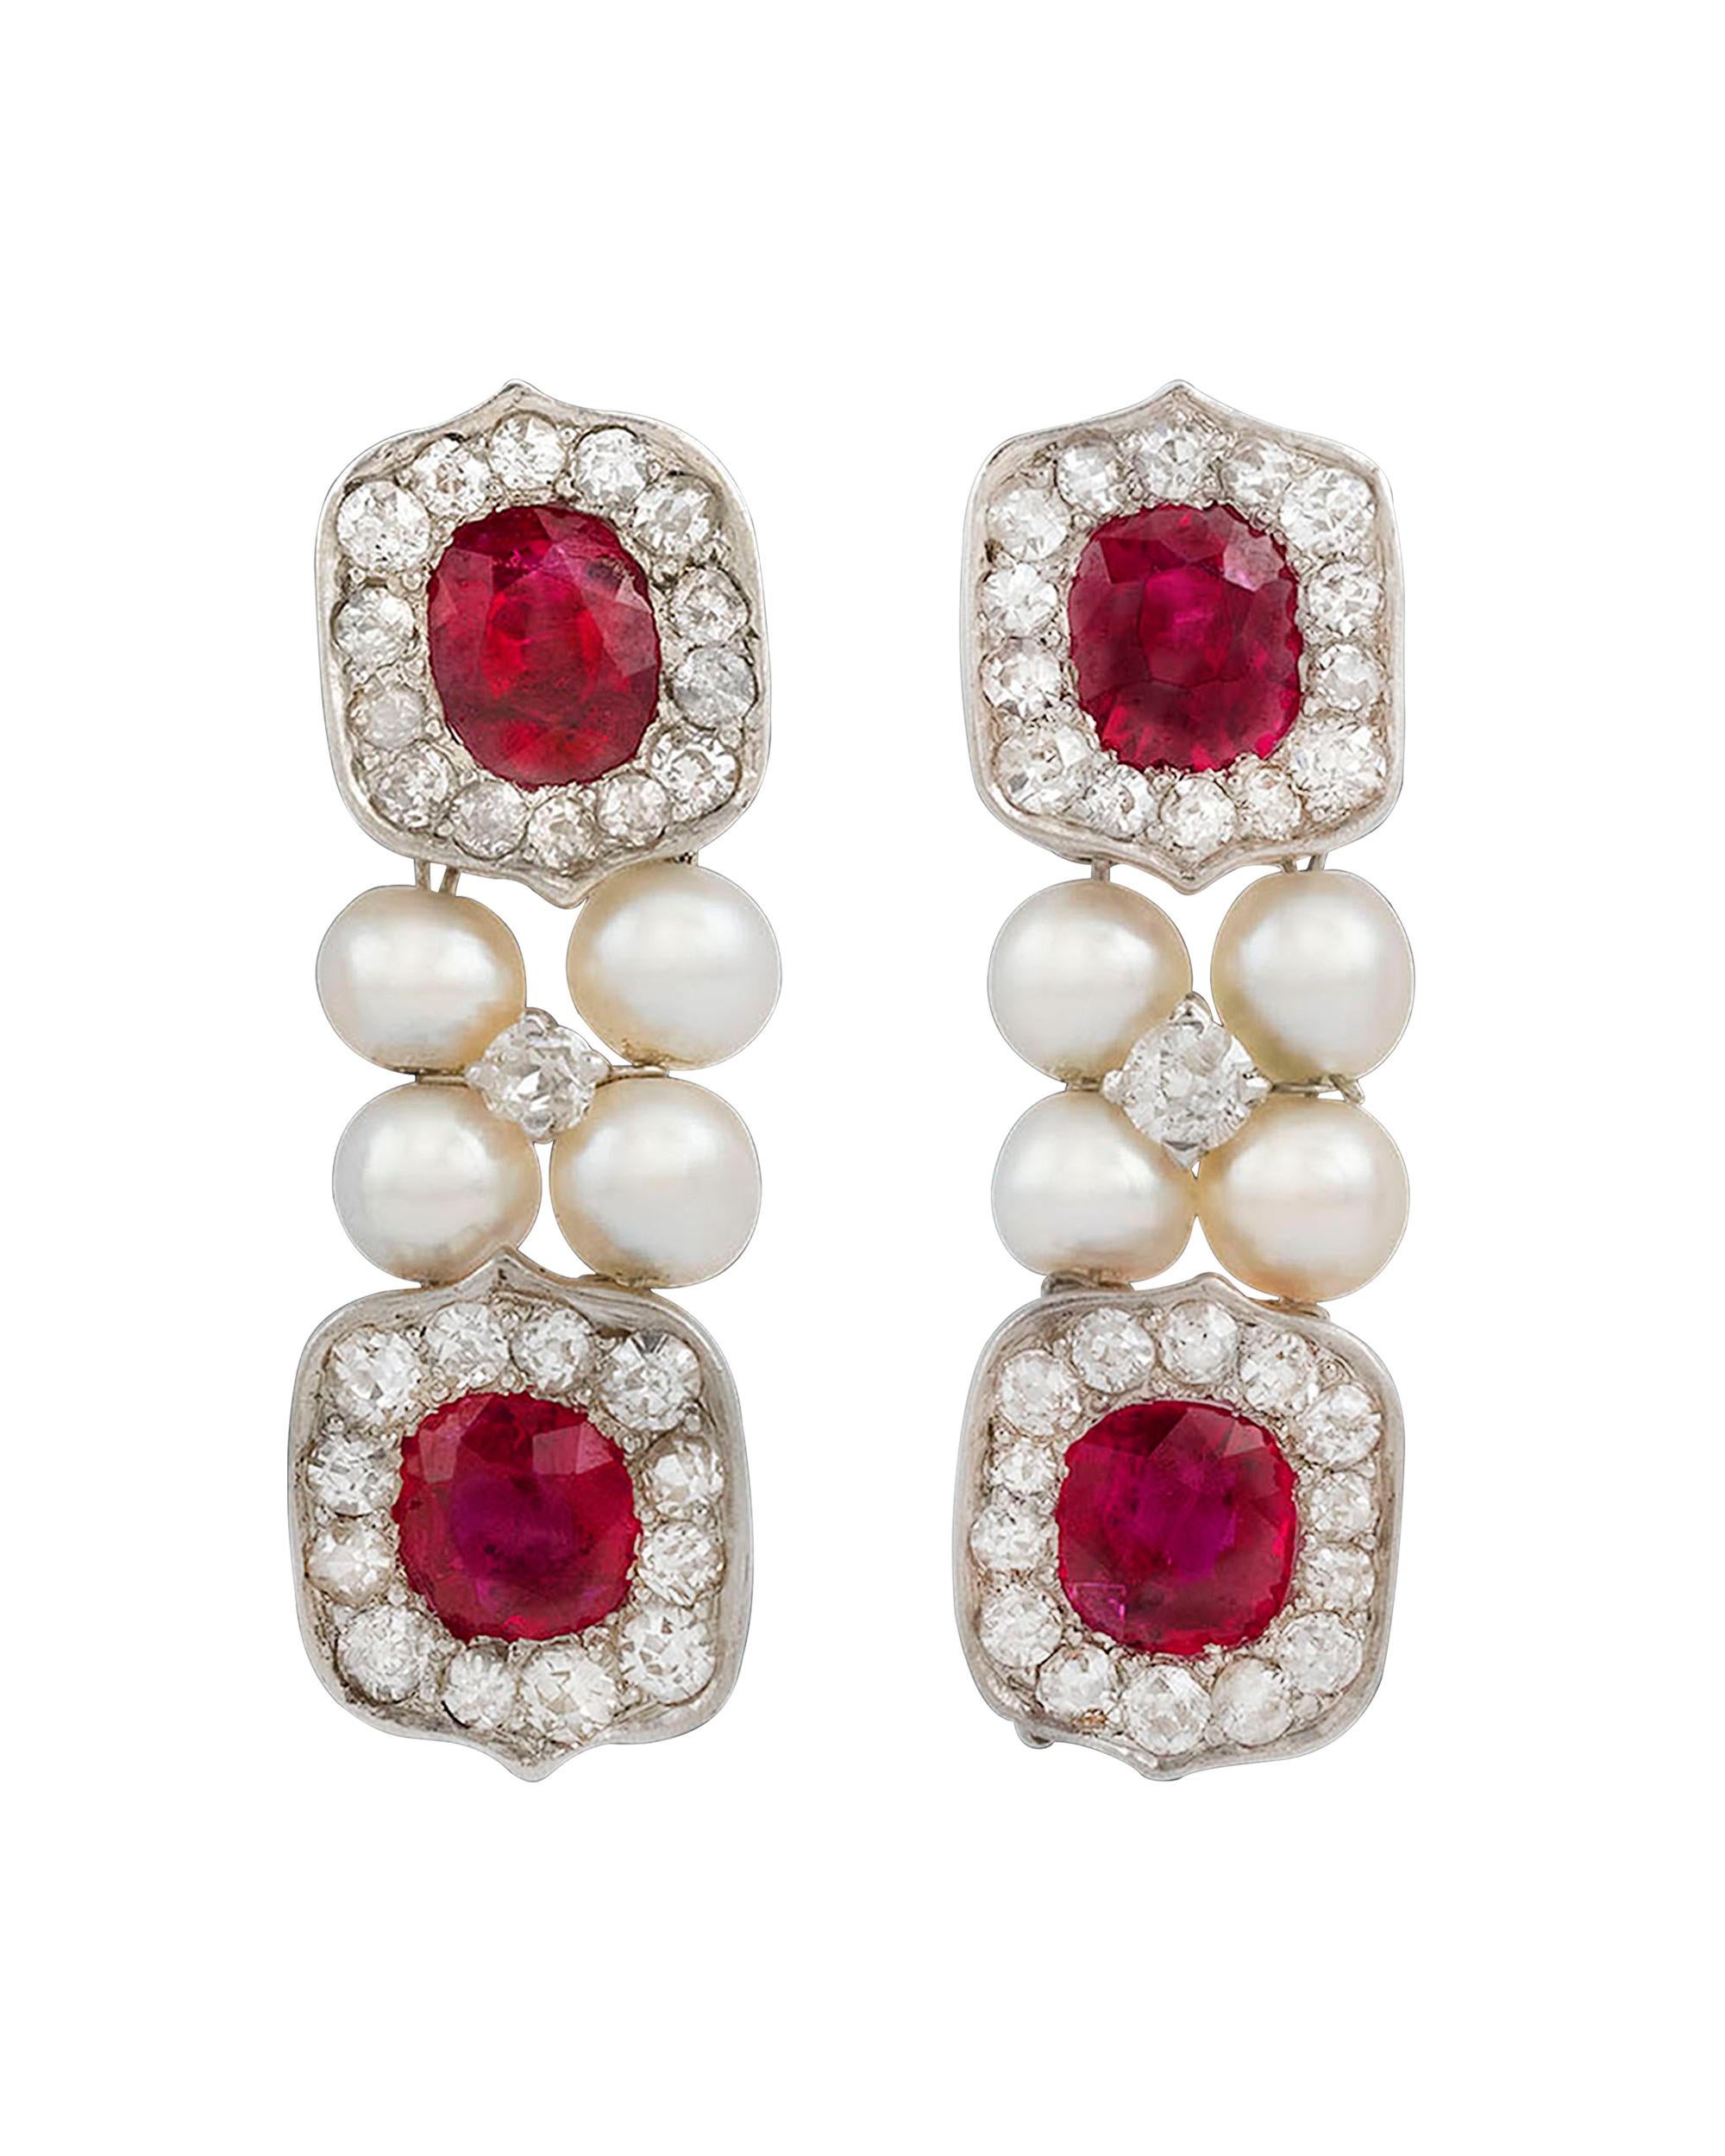 Four brilliant untreated Burma rubies, weighing approximately 2.32 total carats, dazzle in these drop earrings. Creamy white pearls and an estimated .60 carats of shimmering white diamonds accentuate these crimson jewels. The rubies are certified by